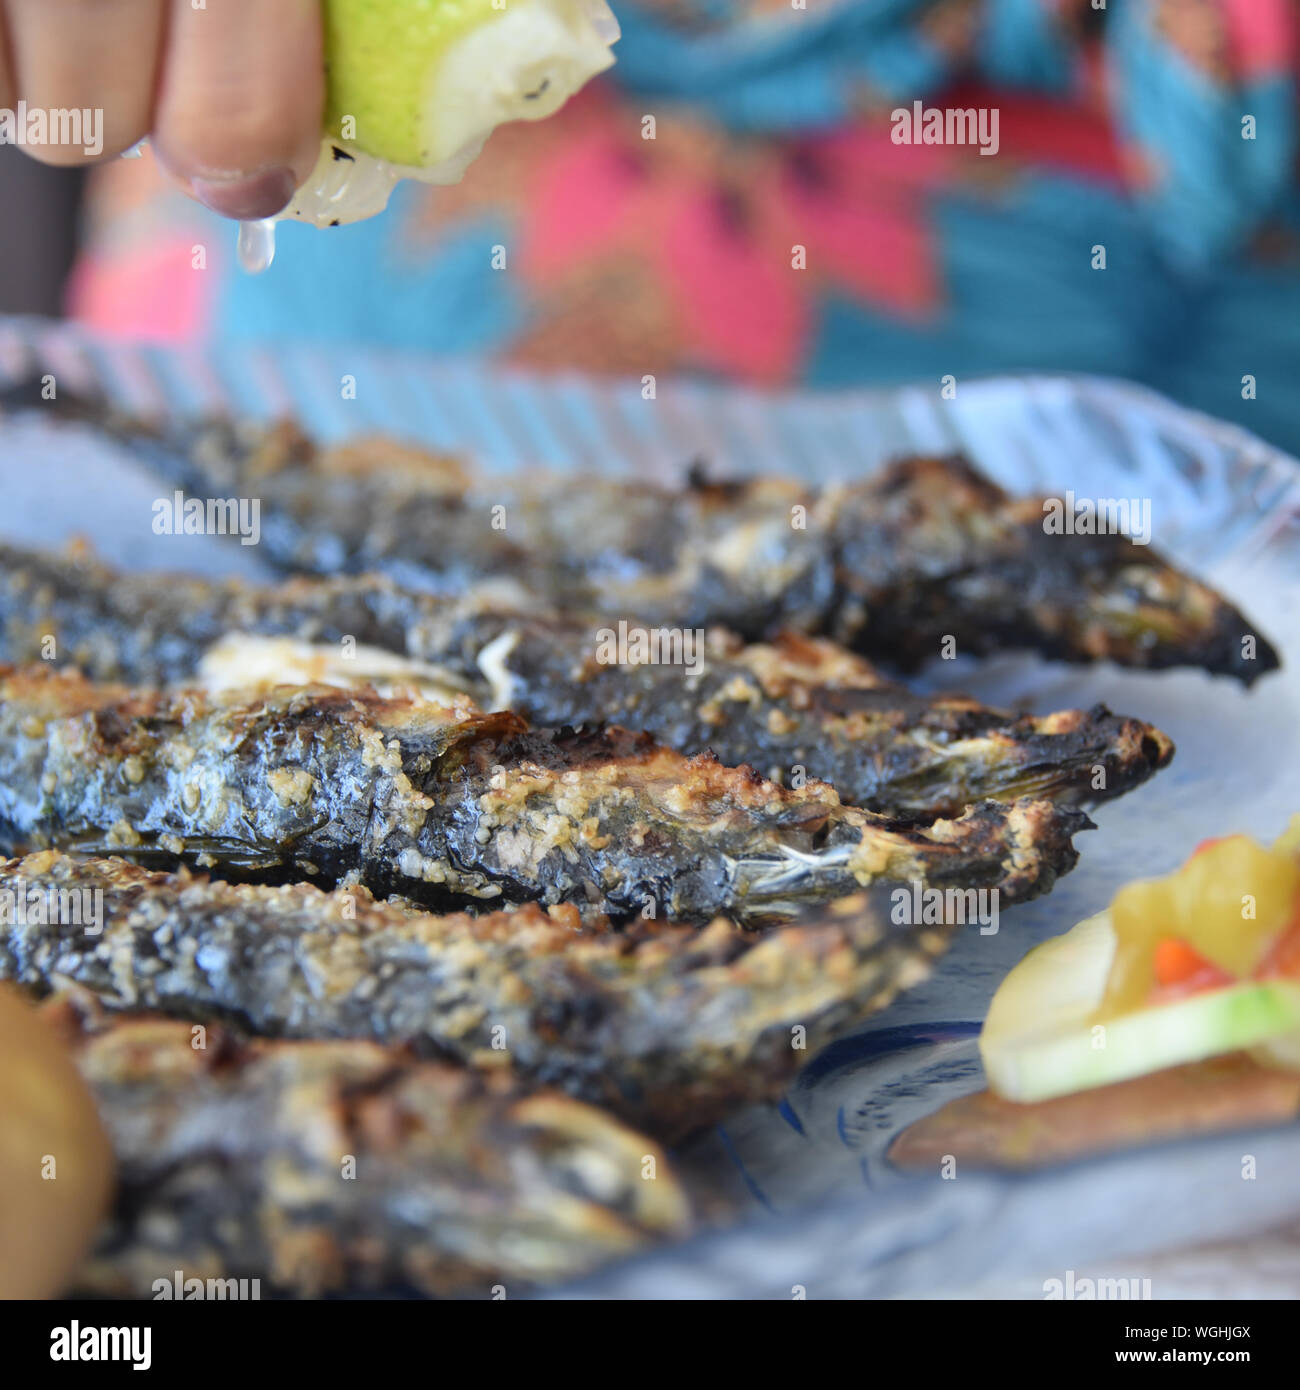 Lison, Portugal: A diner squeezes lemon juice onto freshly grilled Sardines Stock Photo